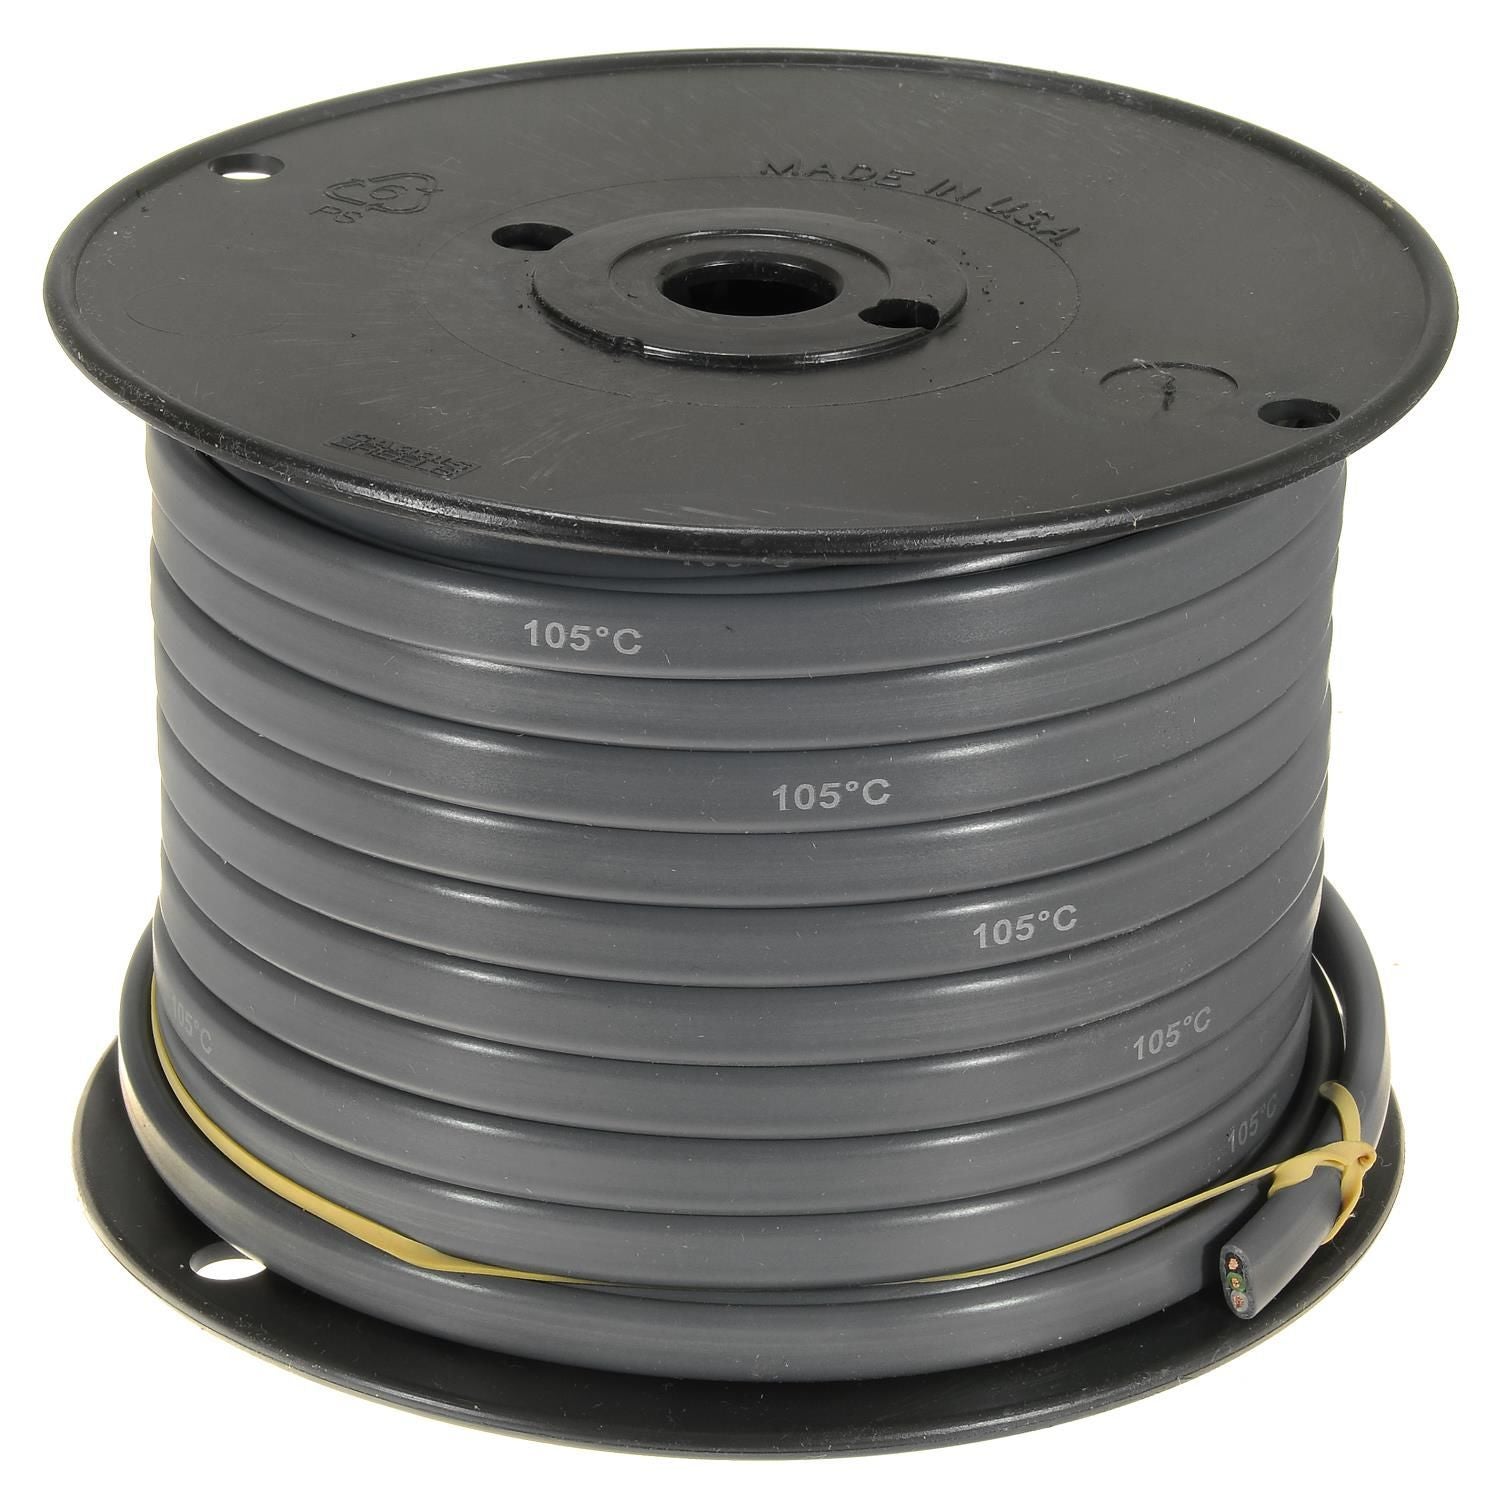 YSP WR125-100 Wells Flat Multi-Conductor Primary Wire (16G, 3 Wire)